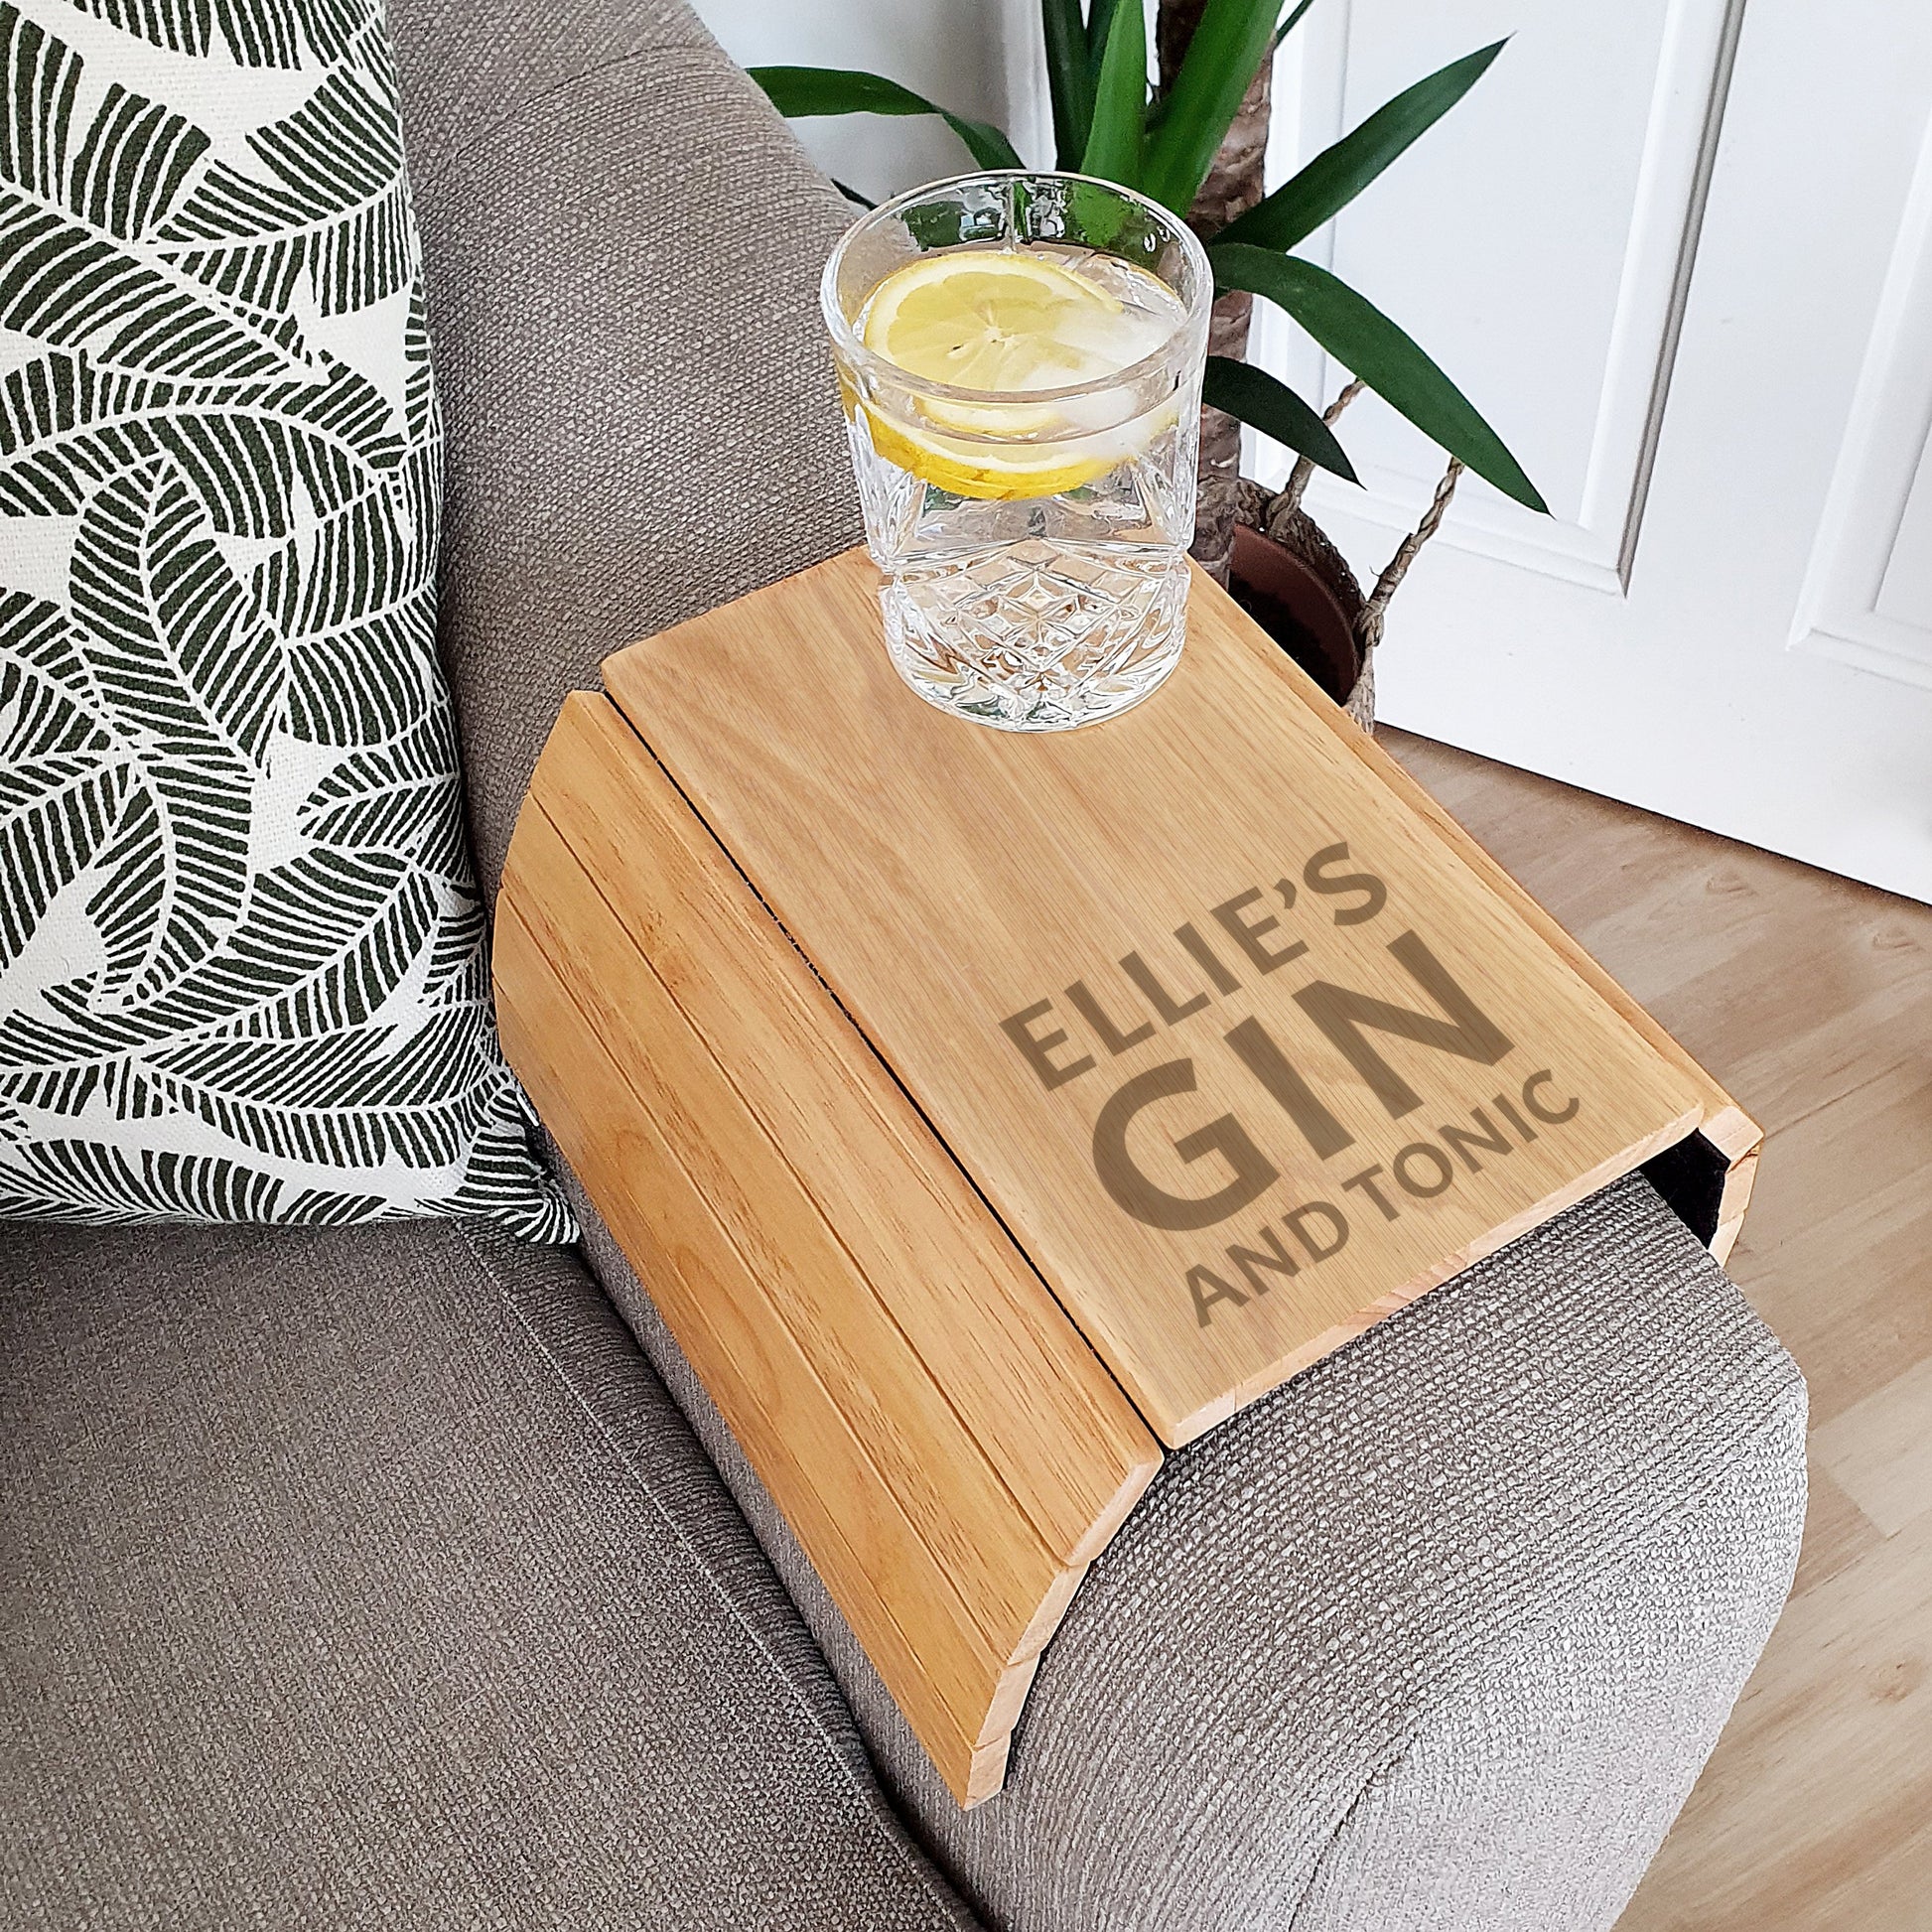 Personalised wooden sofa arm tray Gin and tonic By Sweetlea Gifts